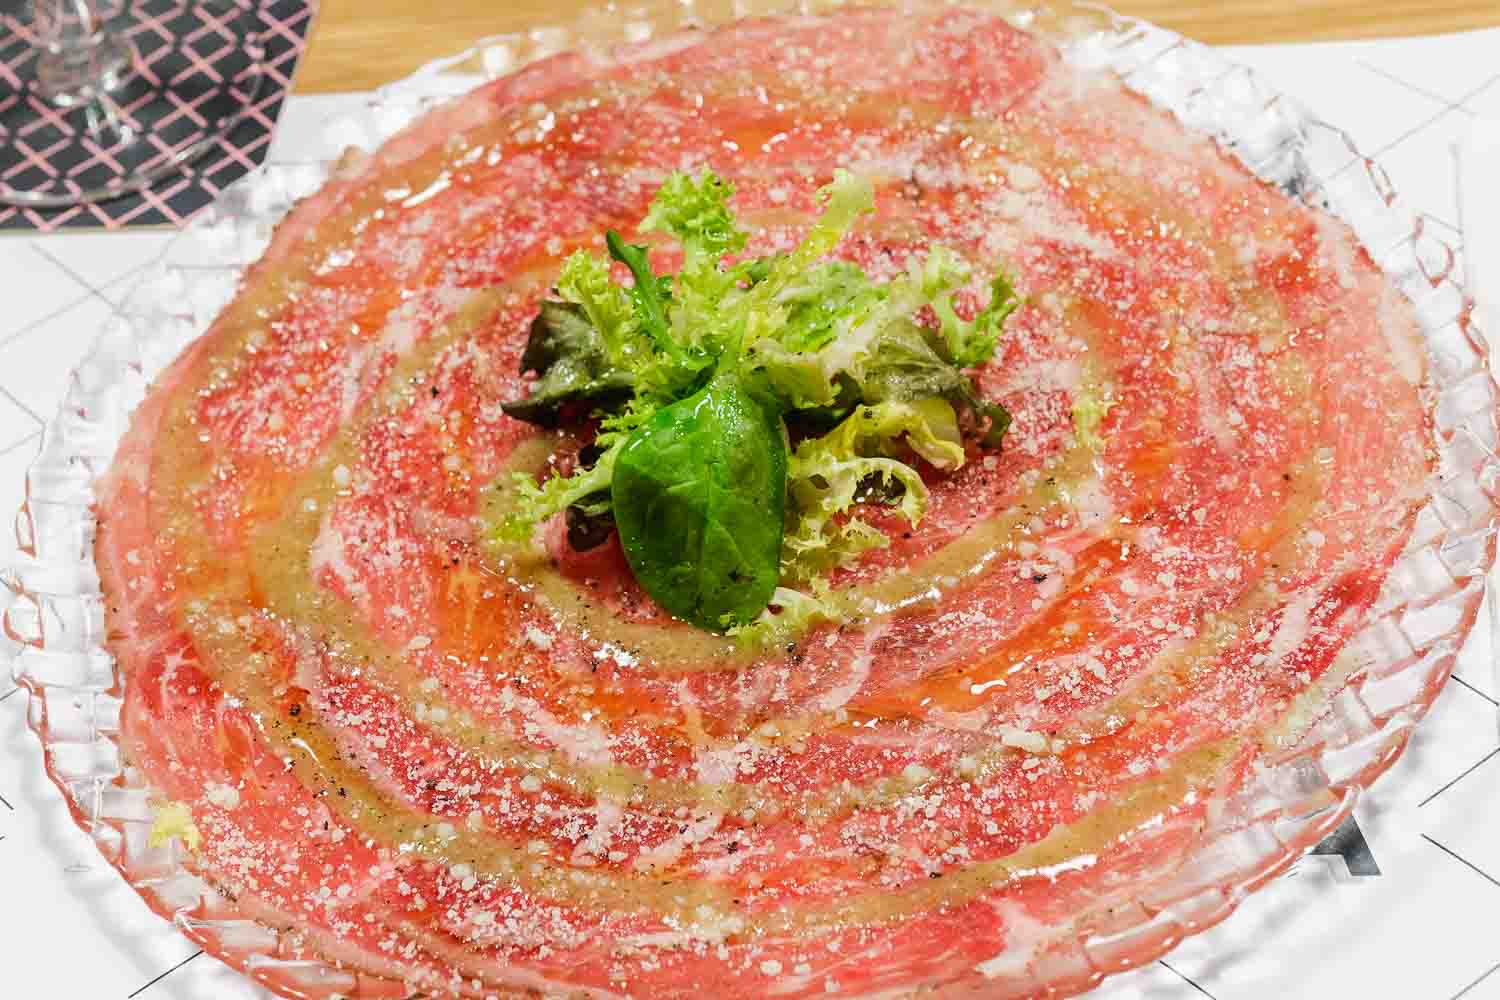 Carpaccio of iberian pork shoulder with aroma of sage and Parmesan